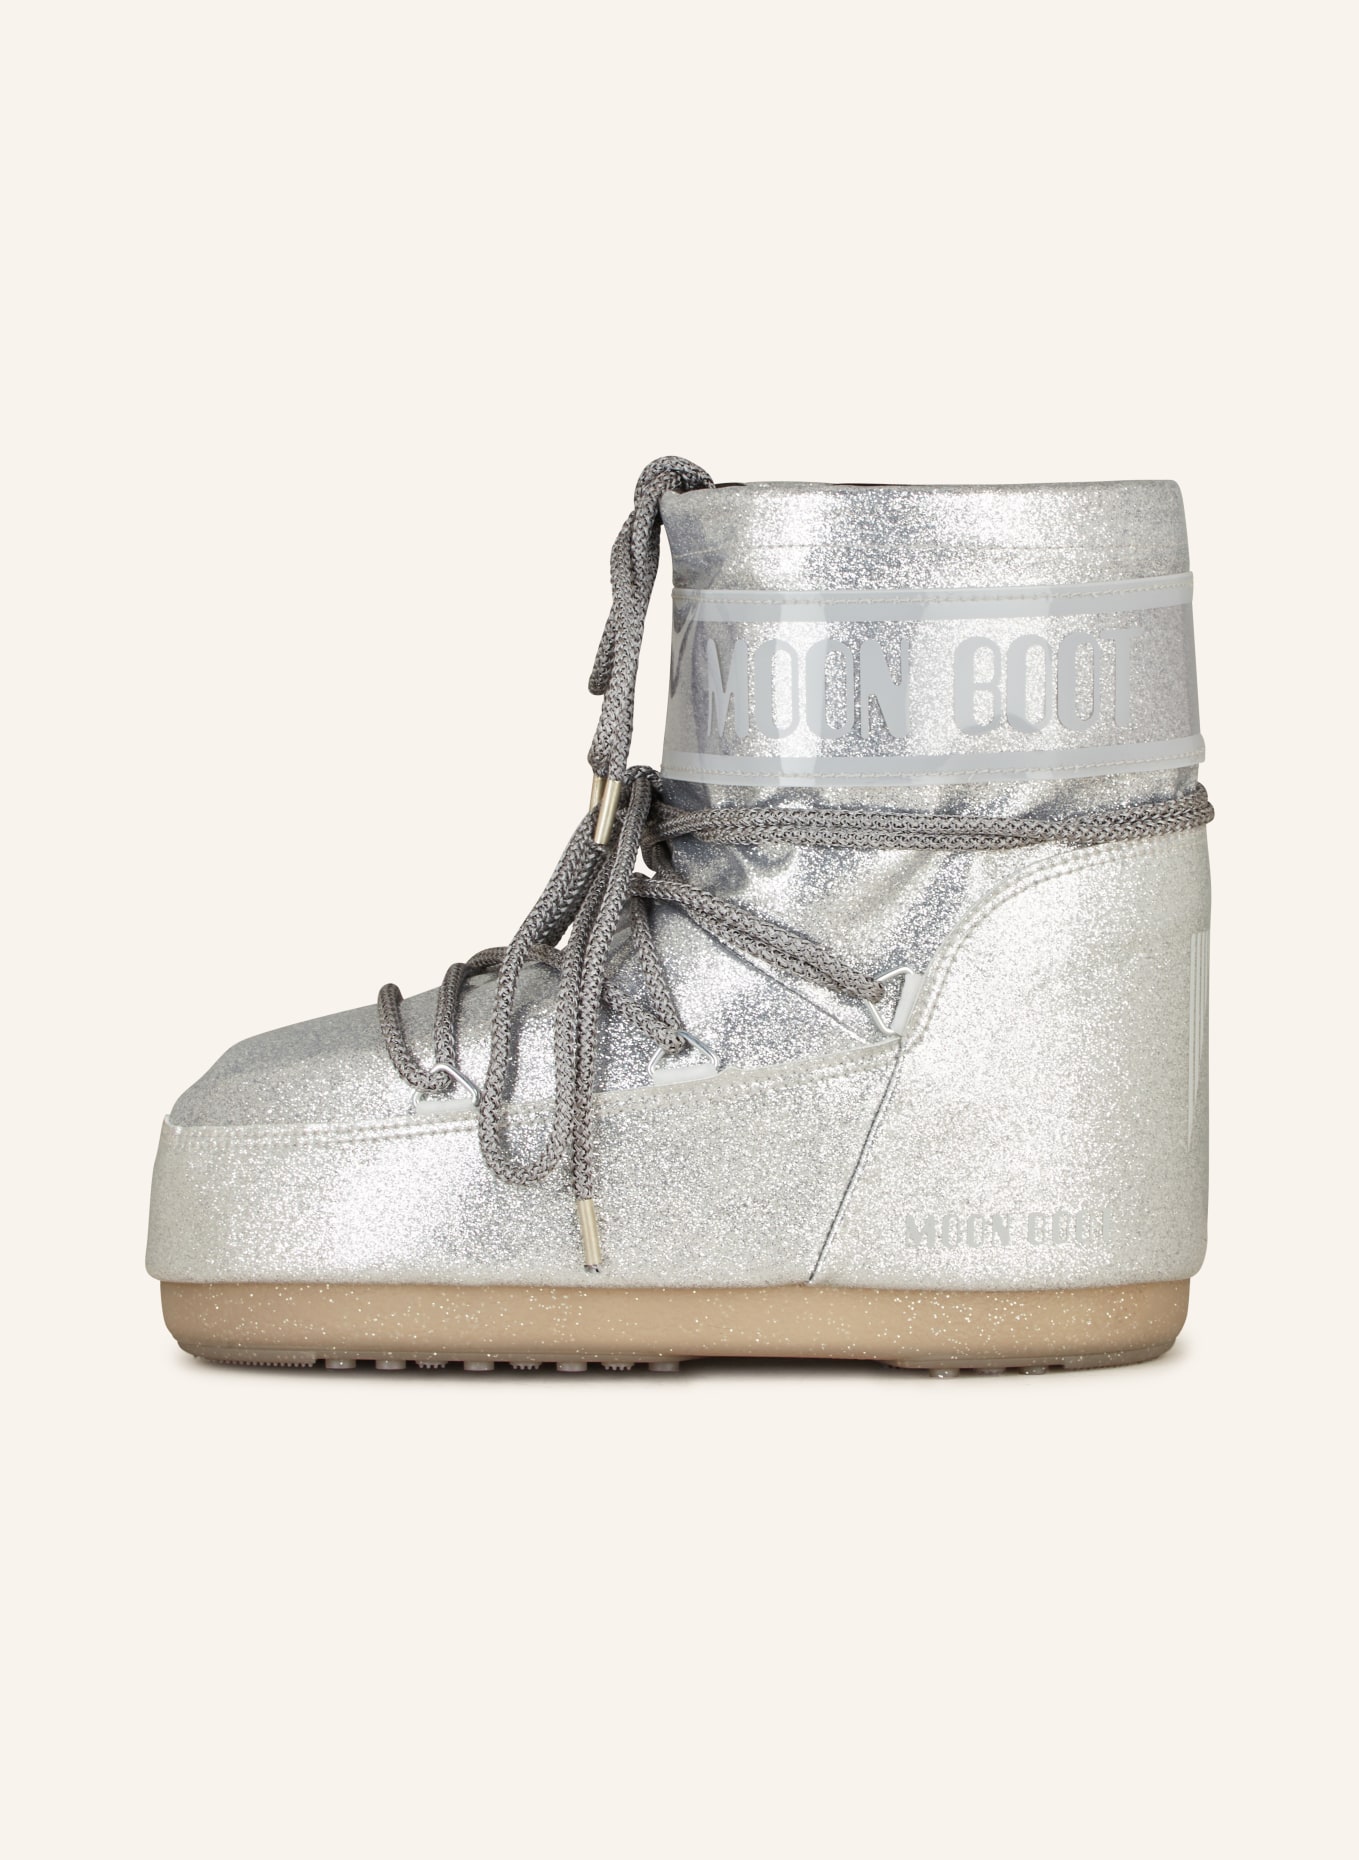 MOON BOOT Moon Boots ICON LOW GLITTER, Farbe: SILBER (Bild 4)